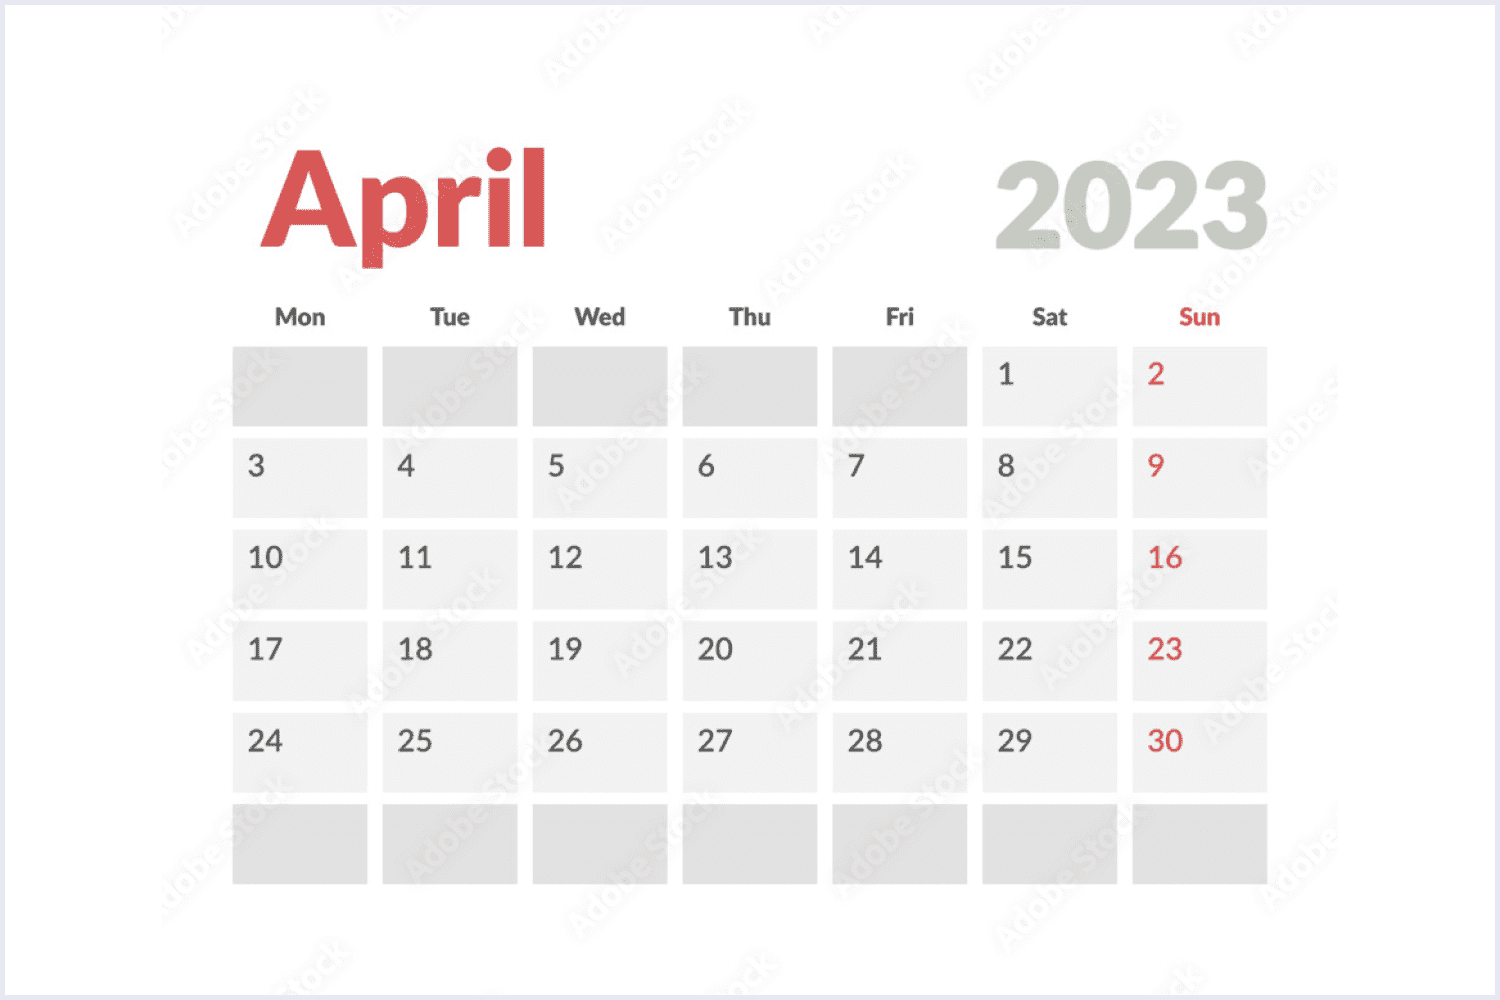 April 2023 calendar With a minimalist design and red accents.